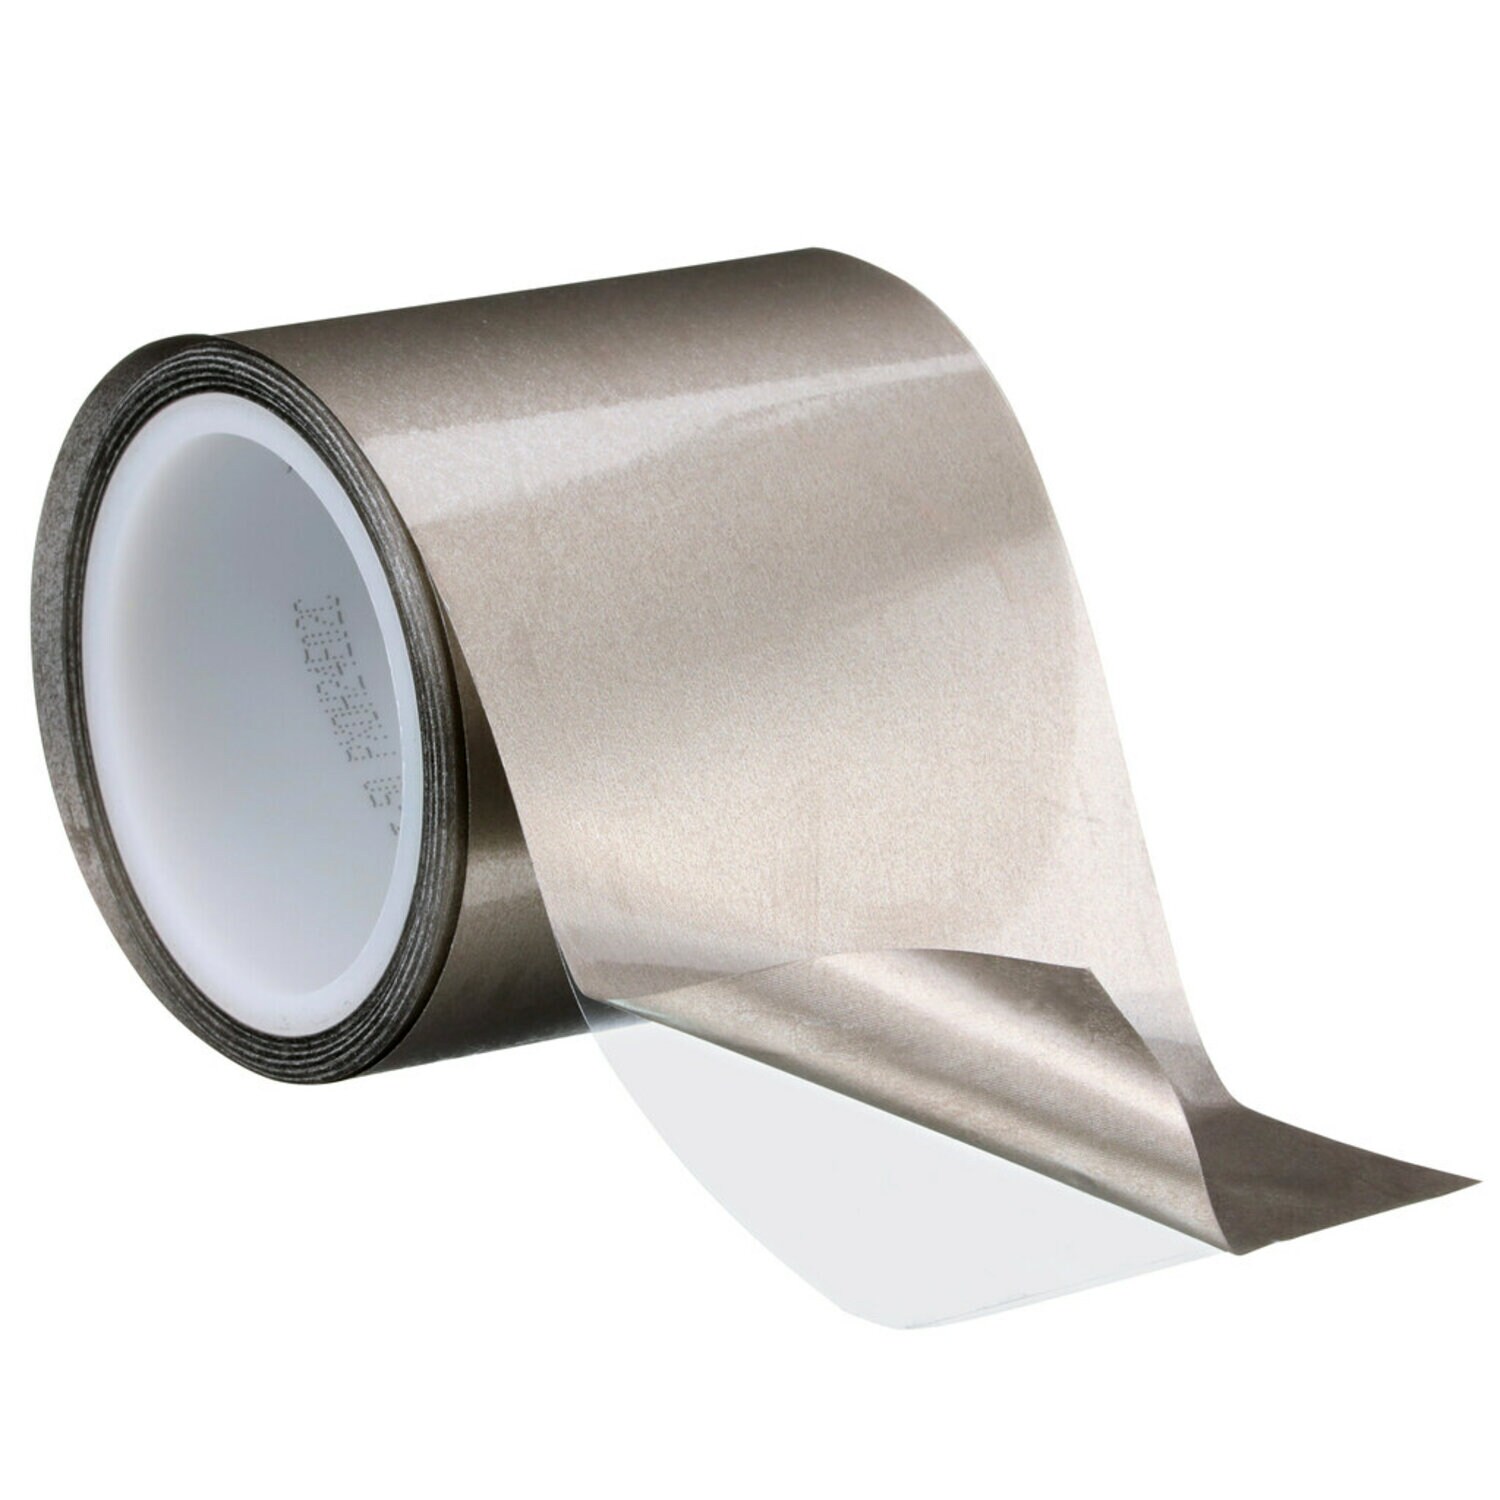 7100313602 - 3M Electrically Conductive Double-Sided Tape 5113DFT-50, 500 mm x 30 m, 1 Roll/Case